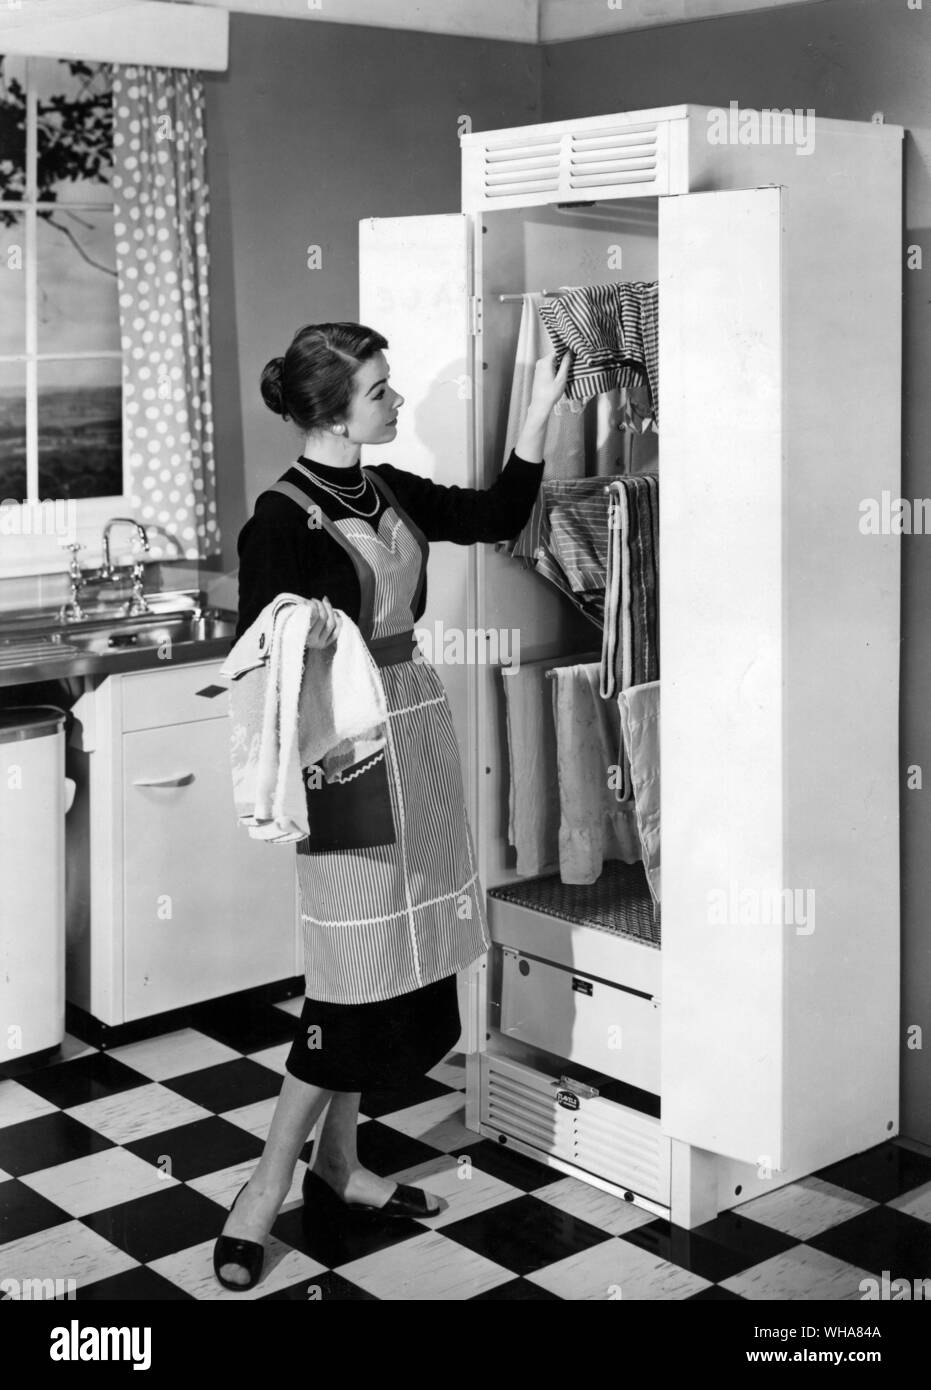 Woman hanging up the washing in a gas heated cabinet Stock Photo